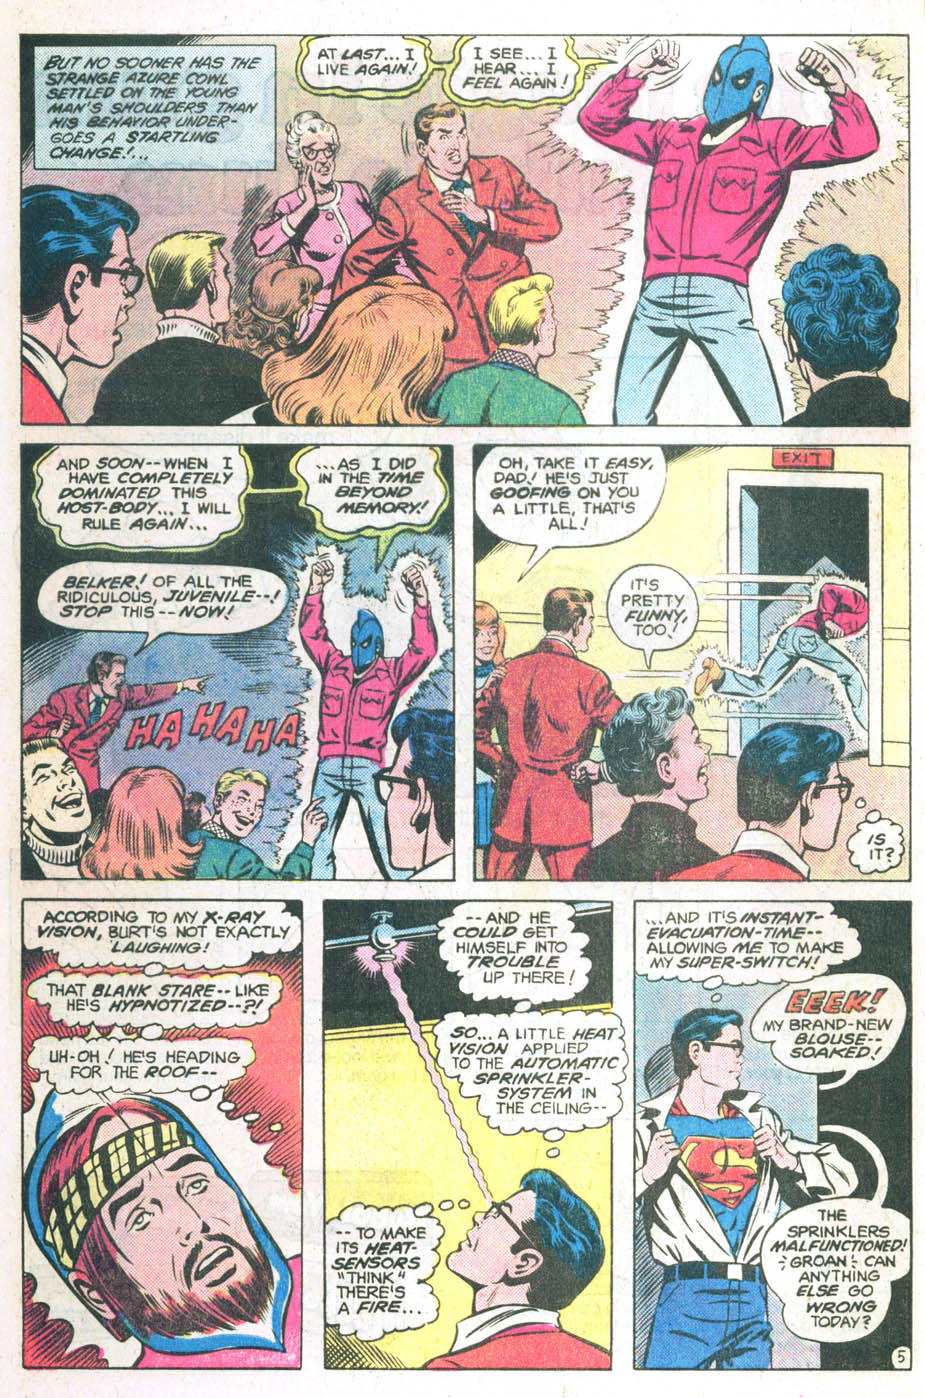 The New Adventures of Superboy 25 Page 5